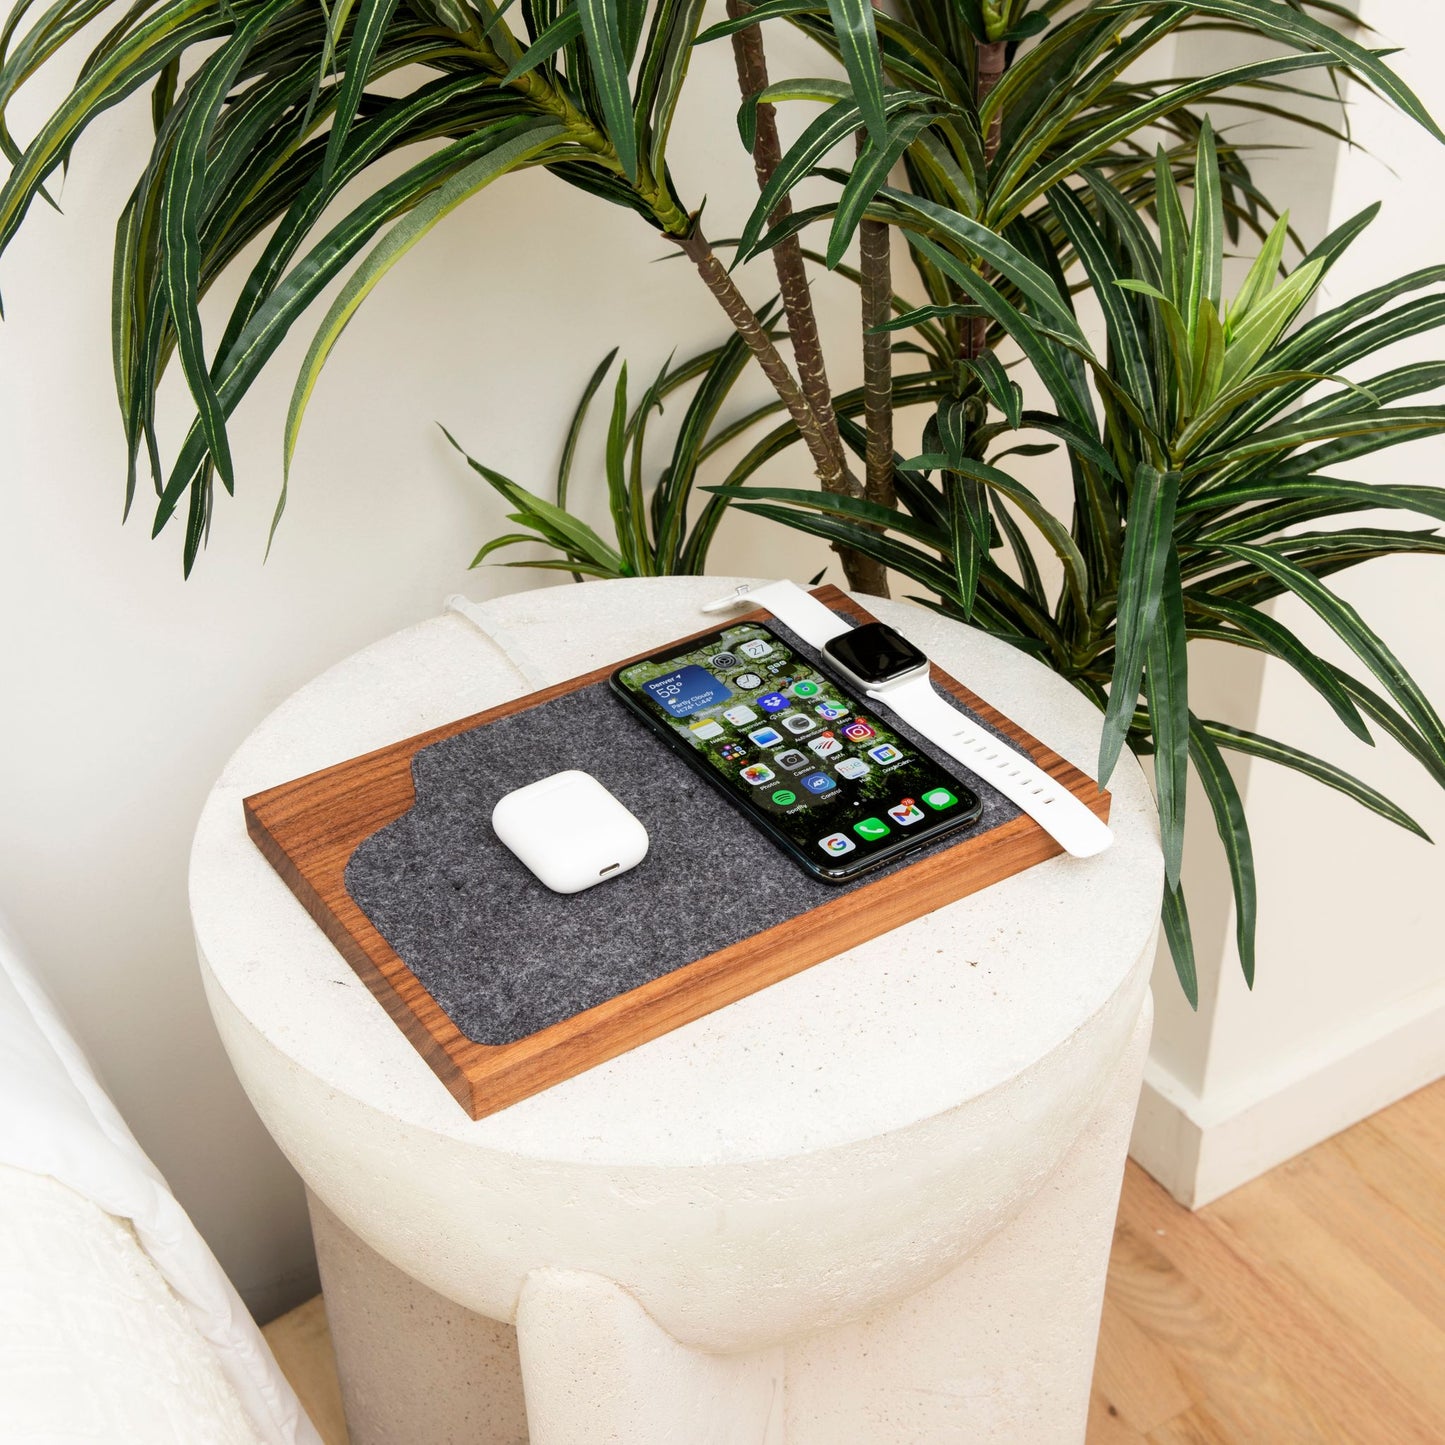 Customizable Docking Station for 1-4 Devices in Walnut